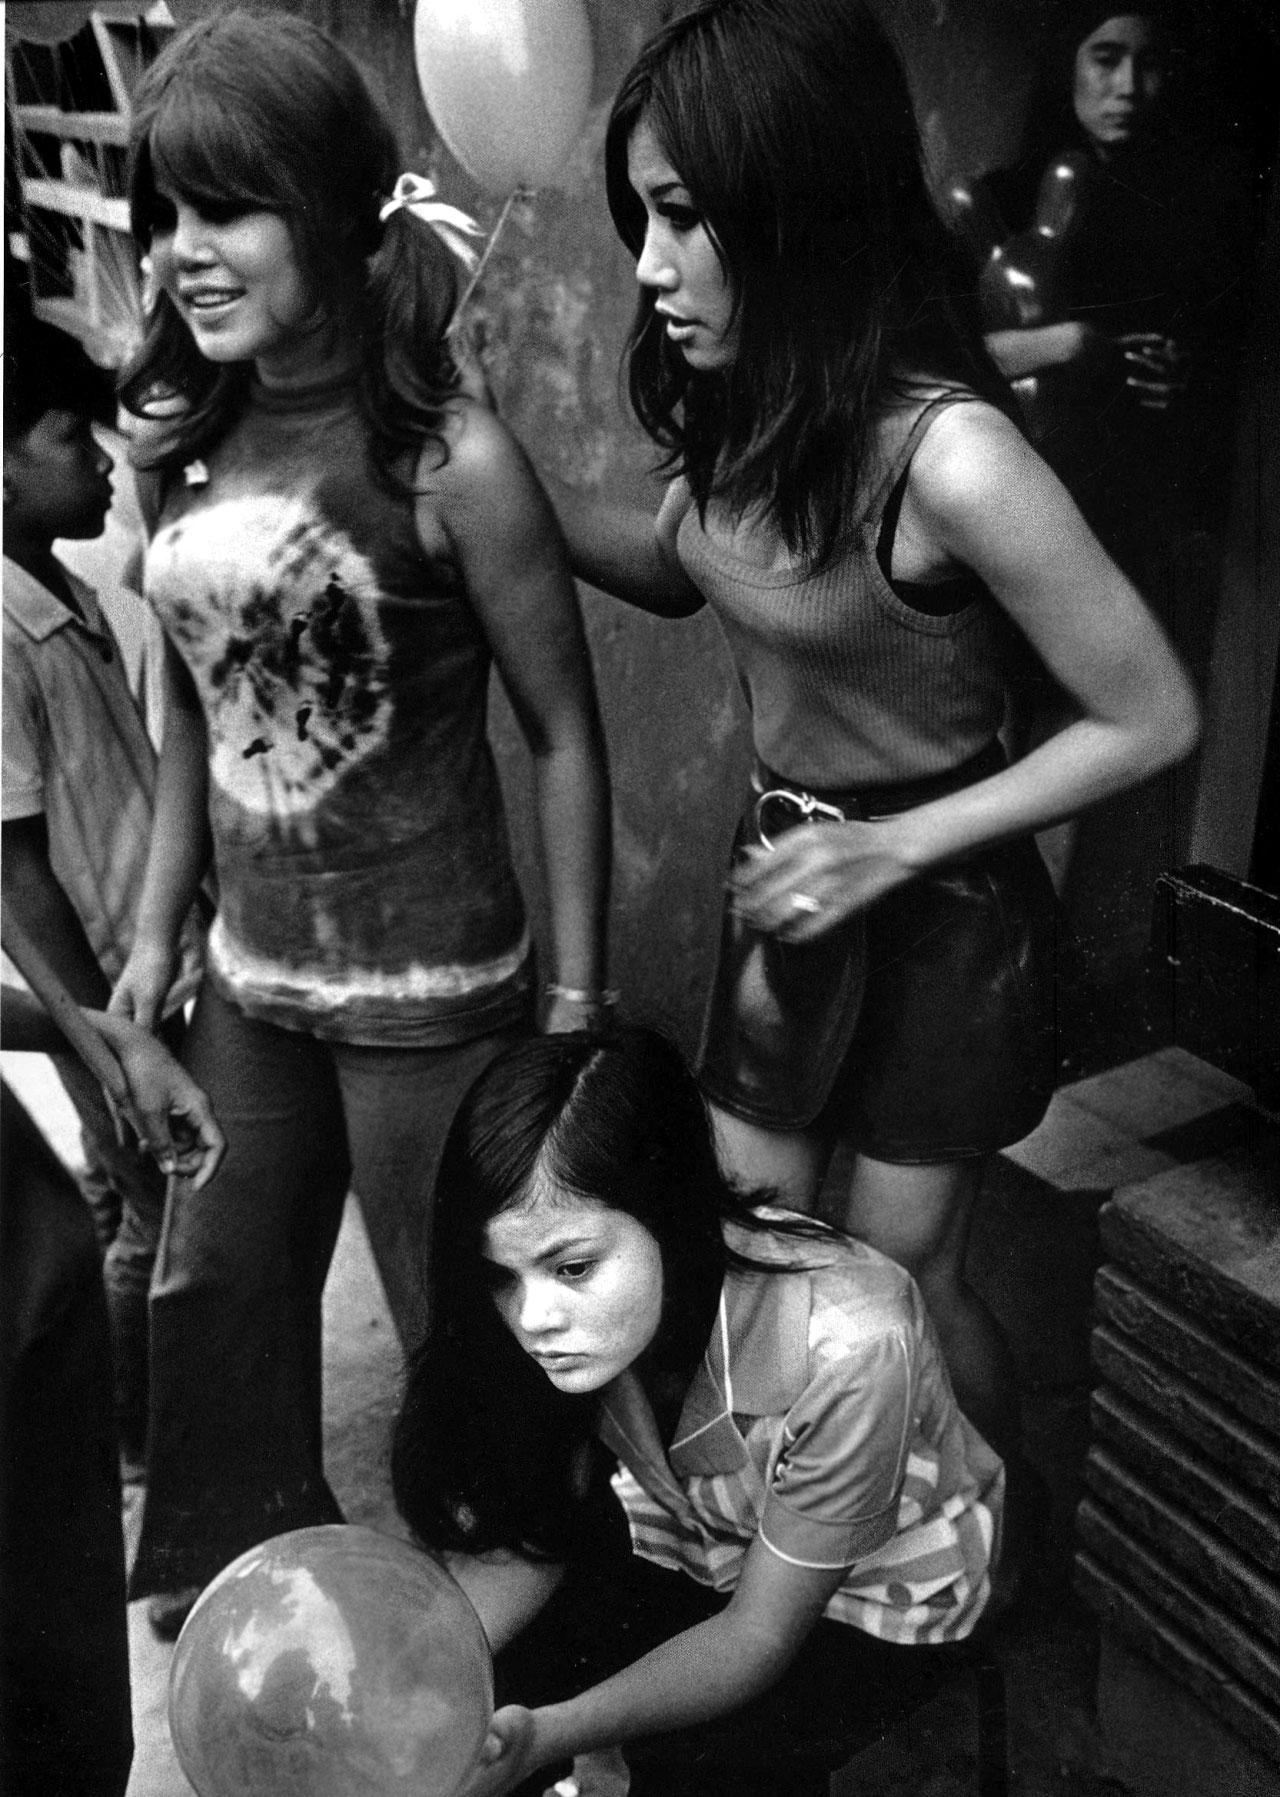 Prostitutes in Can Tho, Vietnam, 1970 by Philip Jones Griffith.